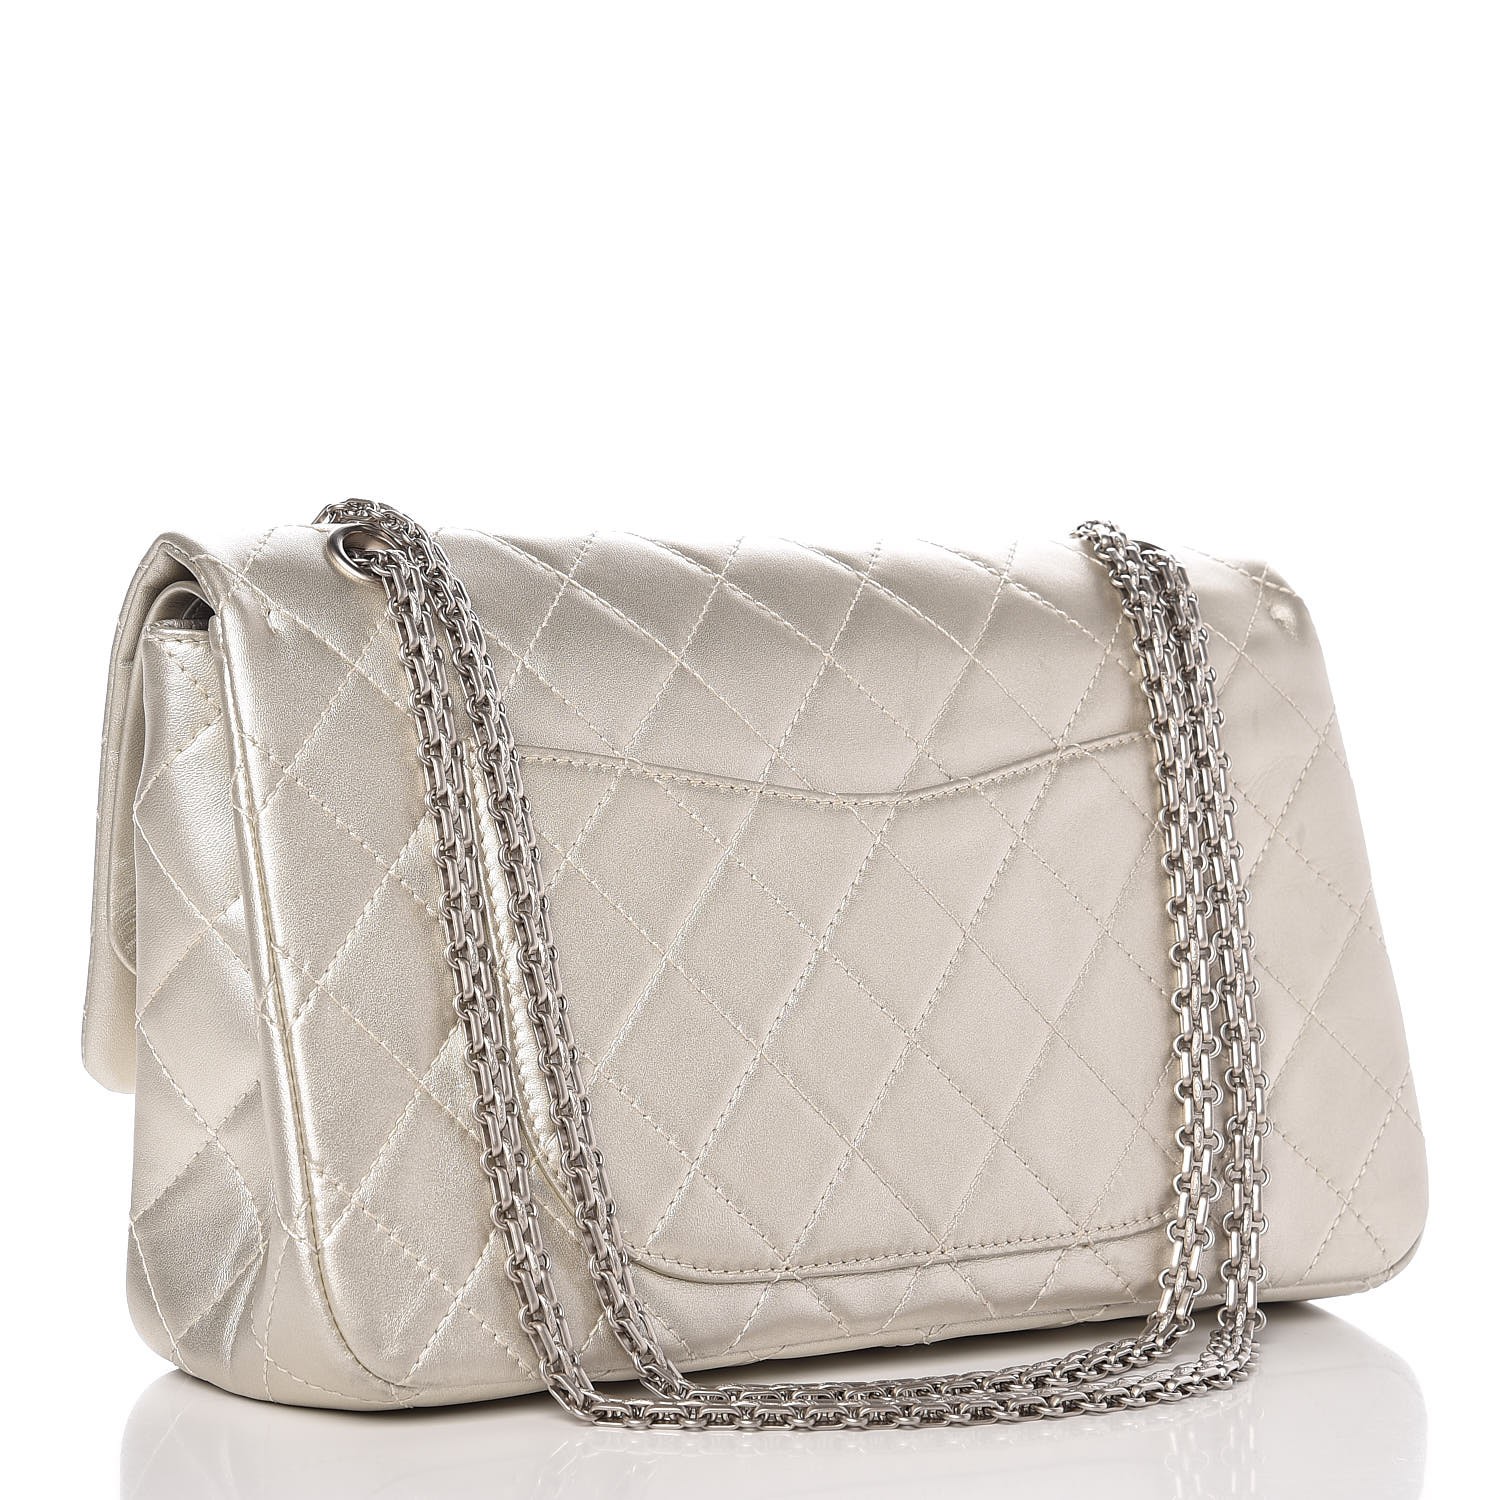 CHANEL Metallic Lambskin Quilted 2.55 Reissue 227 Flap Silver 261073